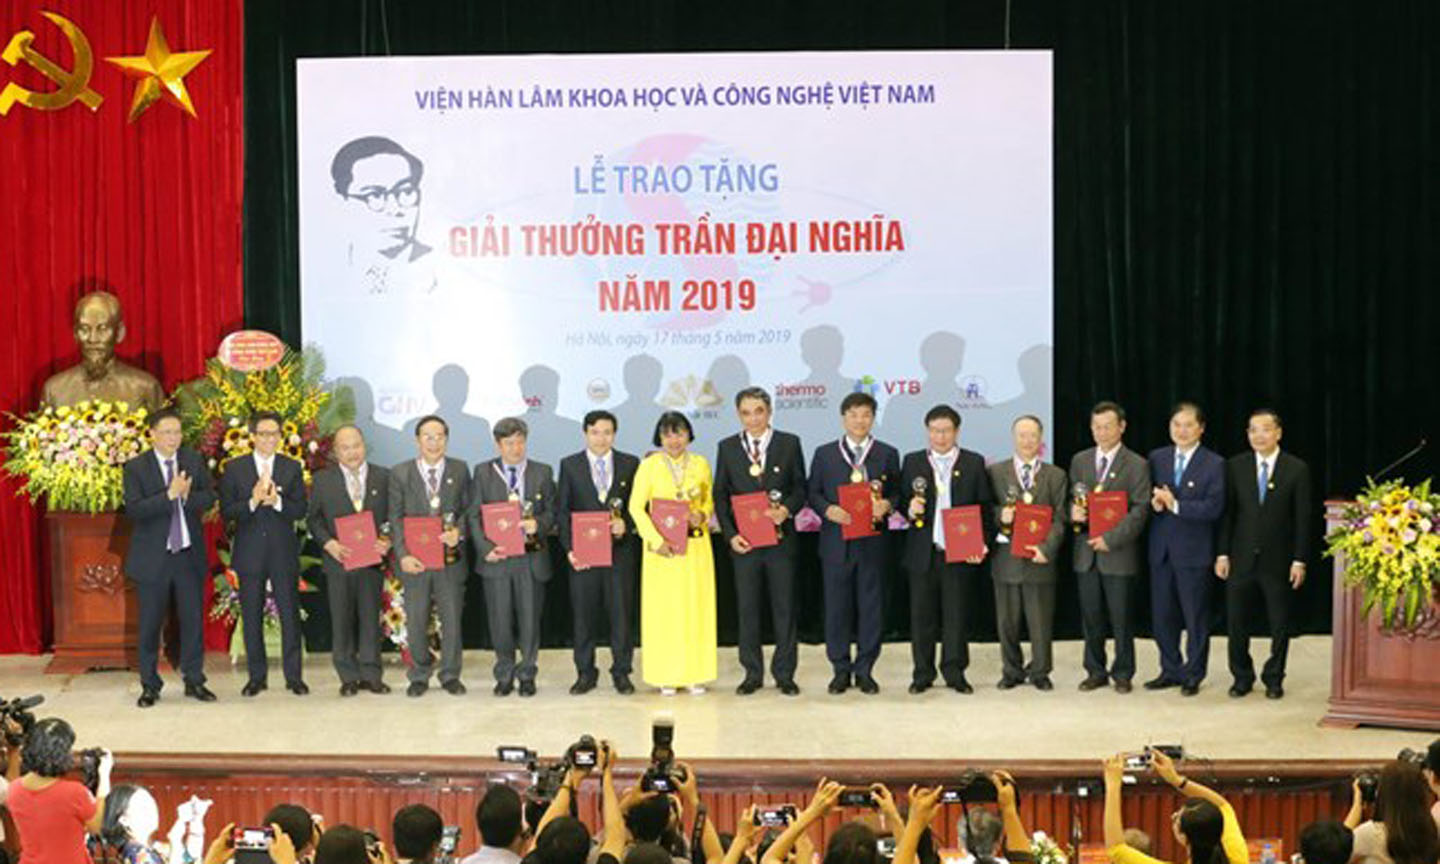 Authors of outstanding scientific researches are presented with the Tran Dai Nghia Award in Hanoi on May 17 (Photo: VNA)